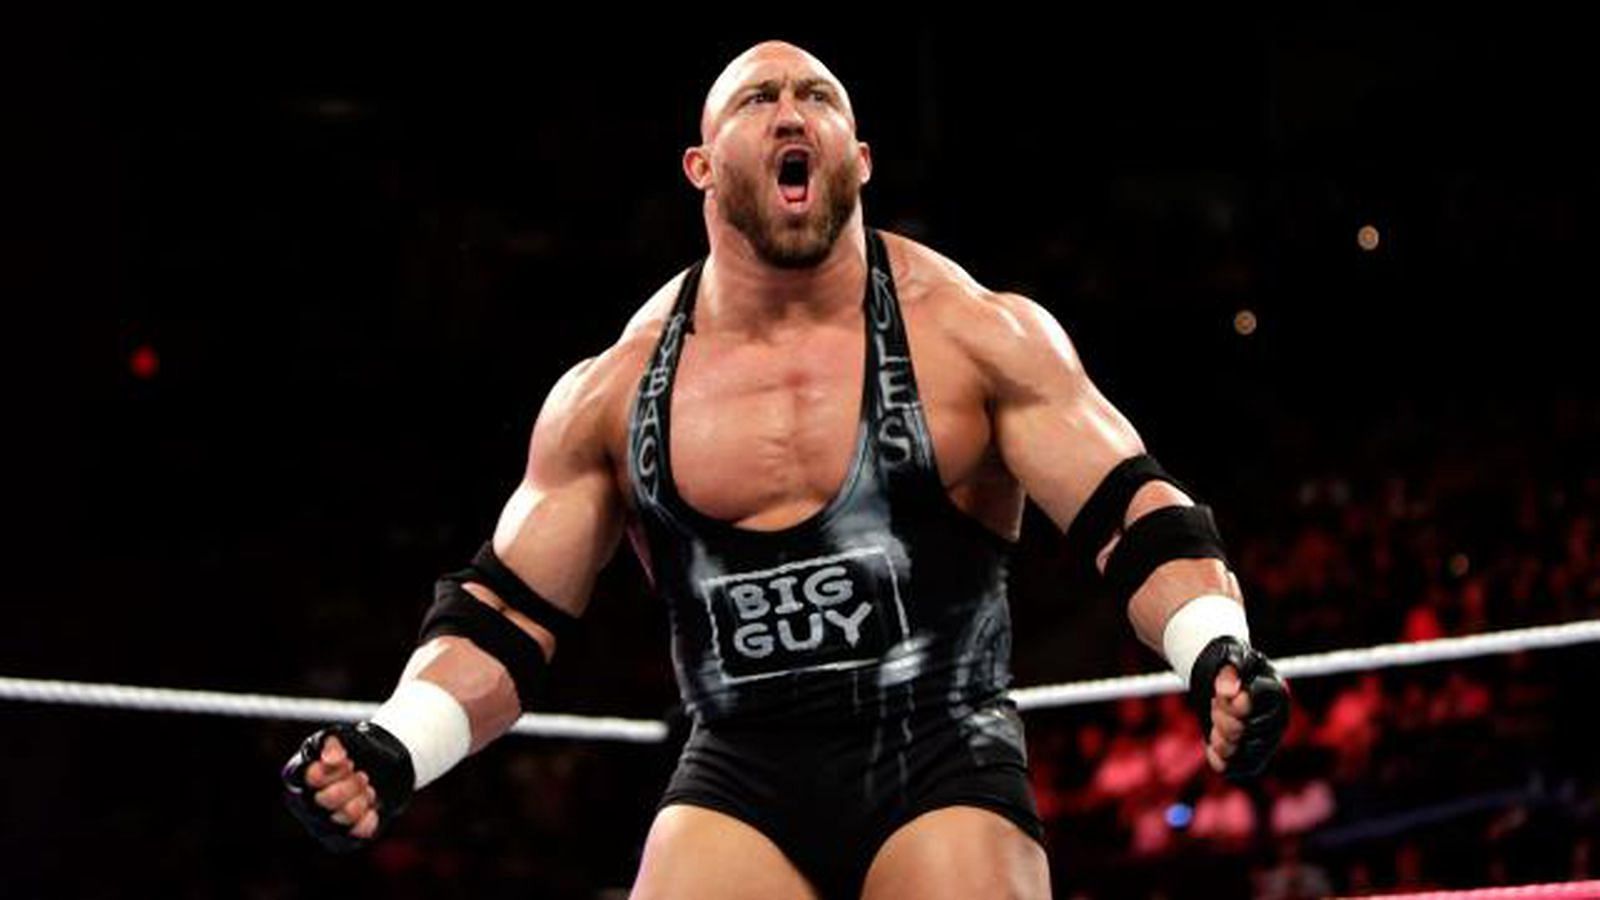 Ryback has not worked for WWE since 2016